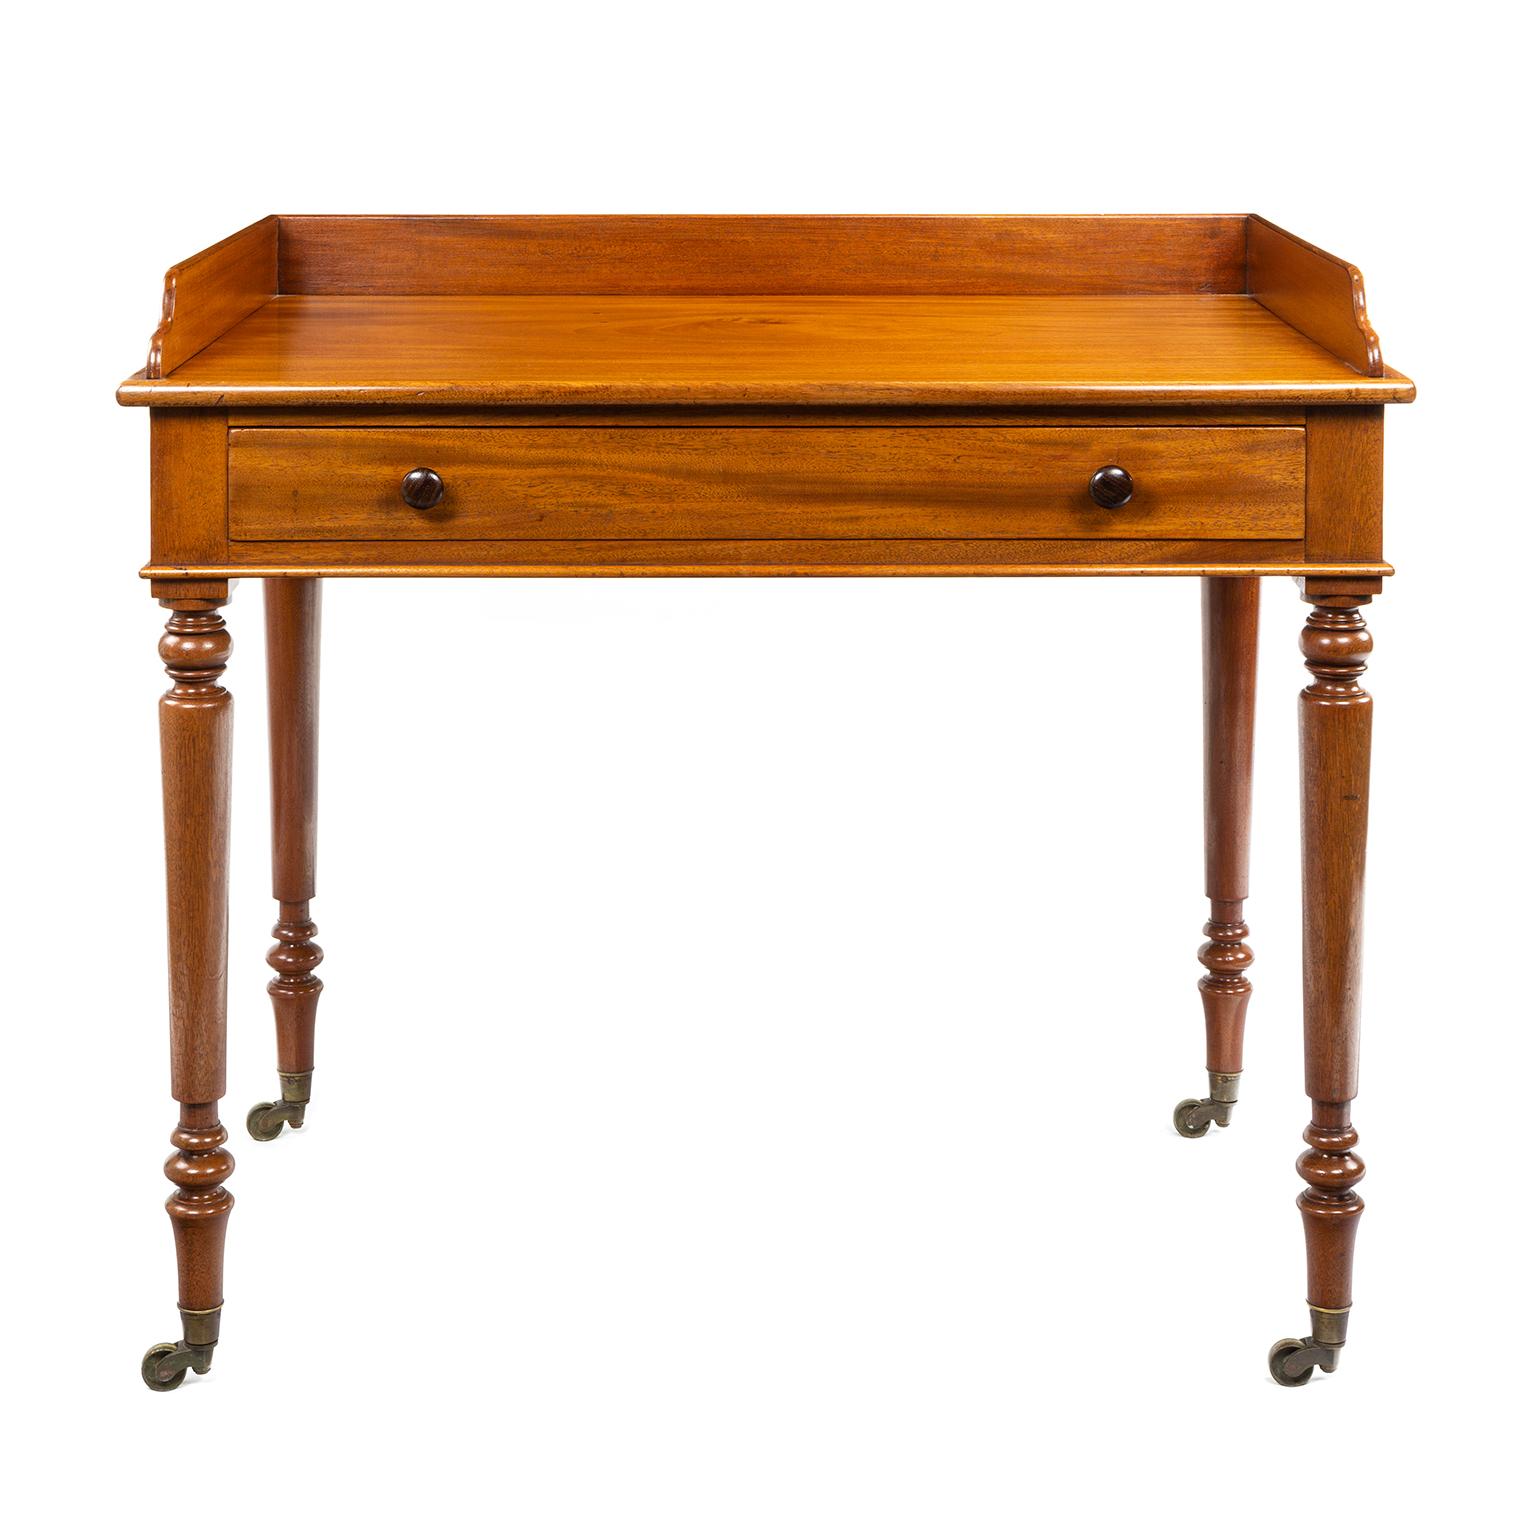 A Gillows mahogany wash stand dating to the Regency period, signed by Gillows and also carrying the stamp of a dealer Edwards and Roberts, later they made their own furniture and are well known for highly decorated pieces in the Edwardian